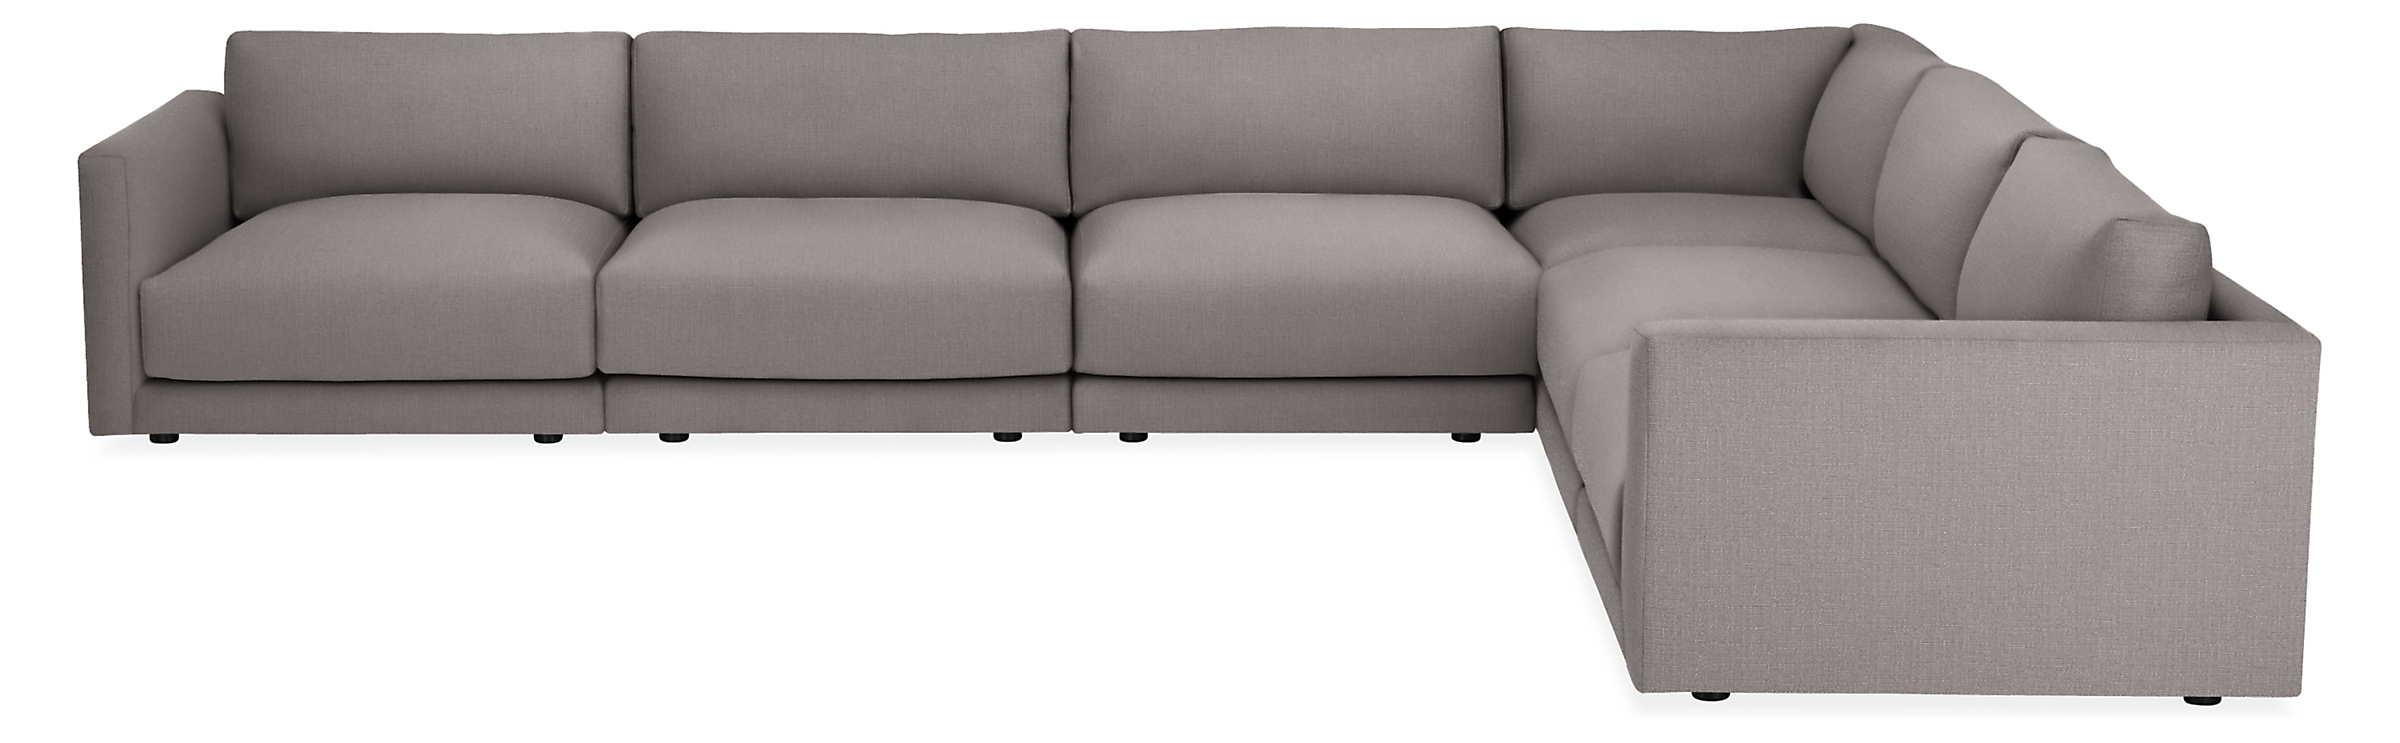 Clemens Deep 164x125" Six-Piece Modular Sectional in Hines Graphite